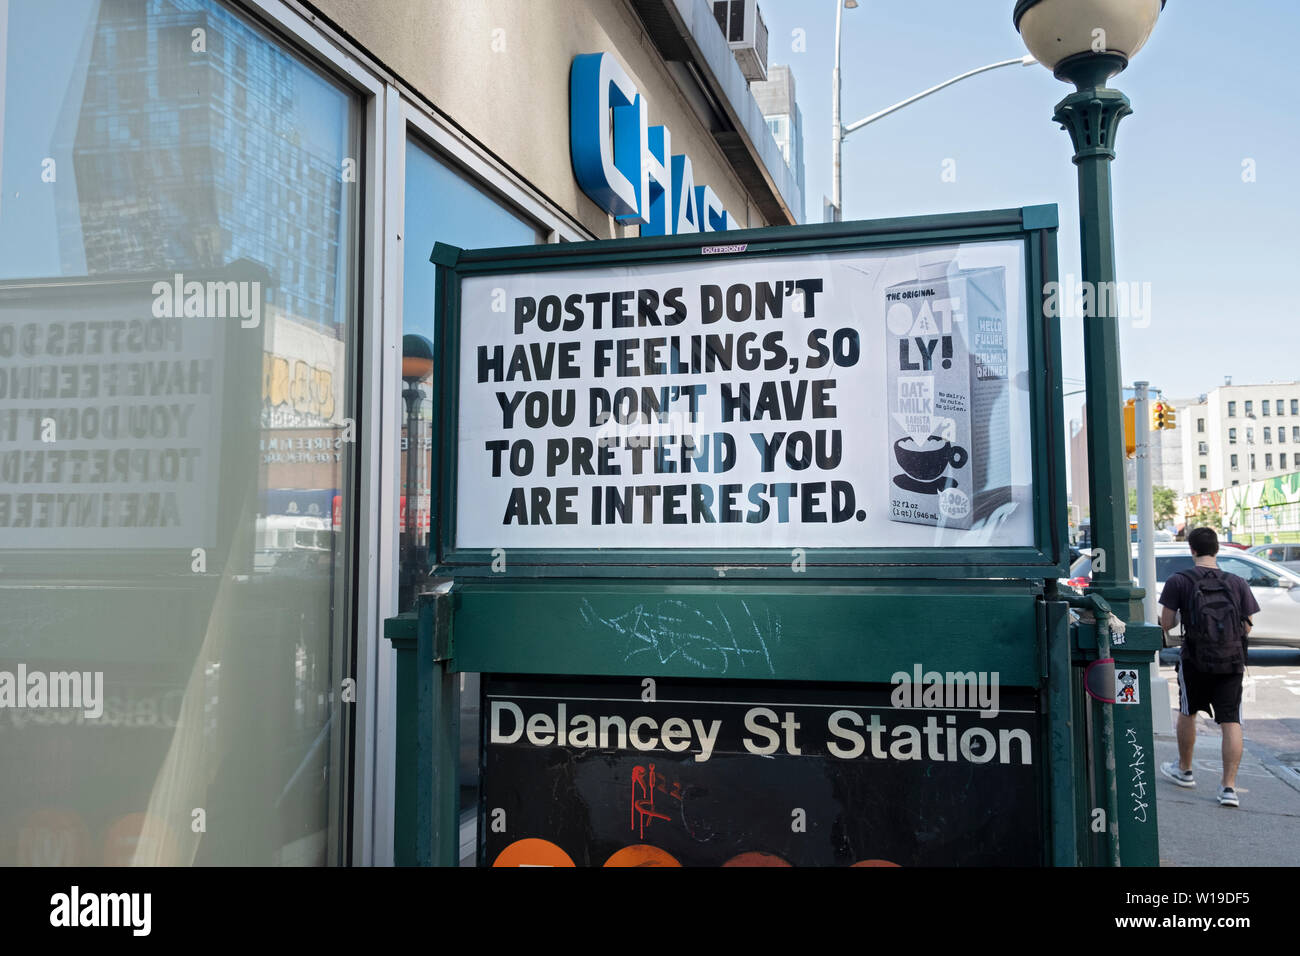 A funny clever advertisement for Oatly oak milk displayed above a subway entrance on the Lower East Side of Manhattan, New York City. Stock Photo